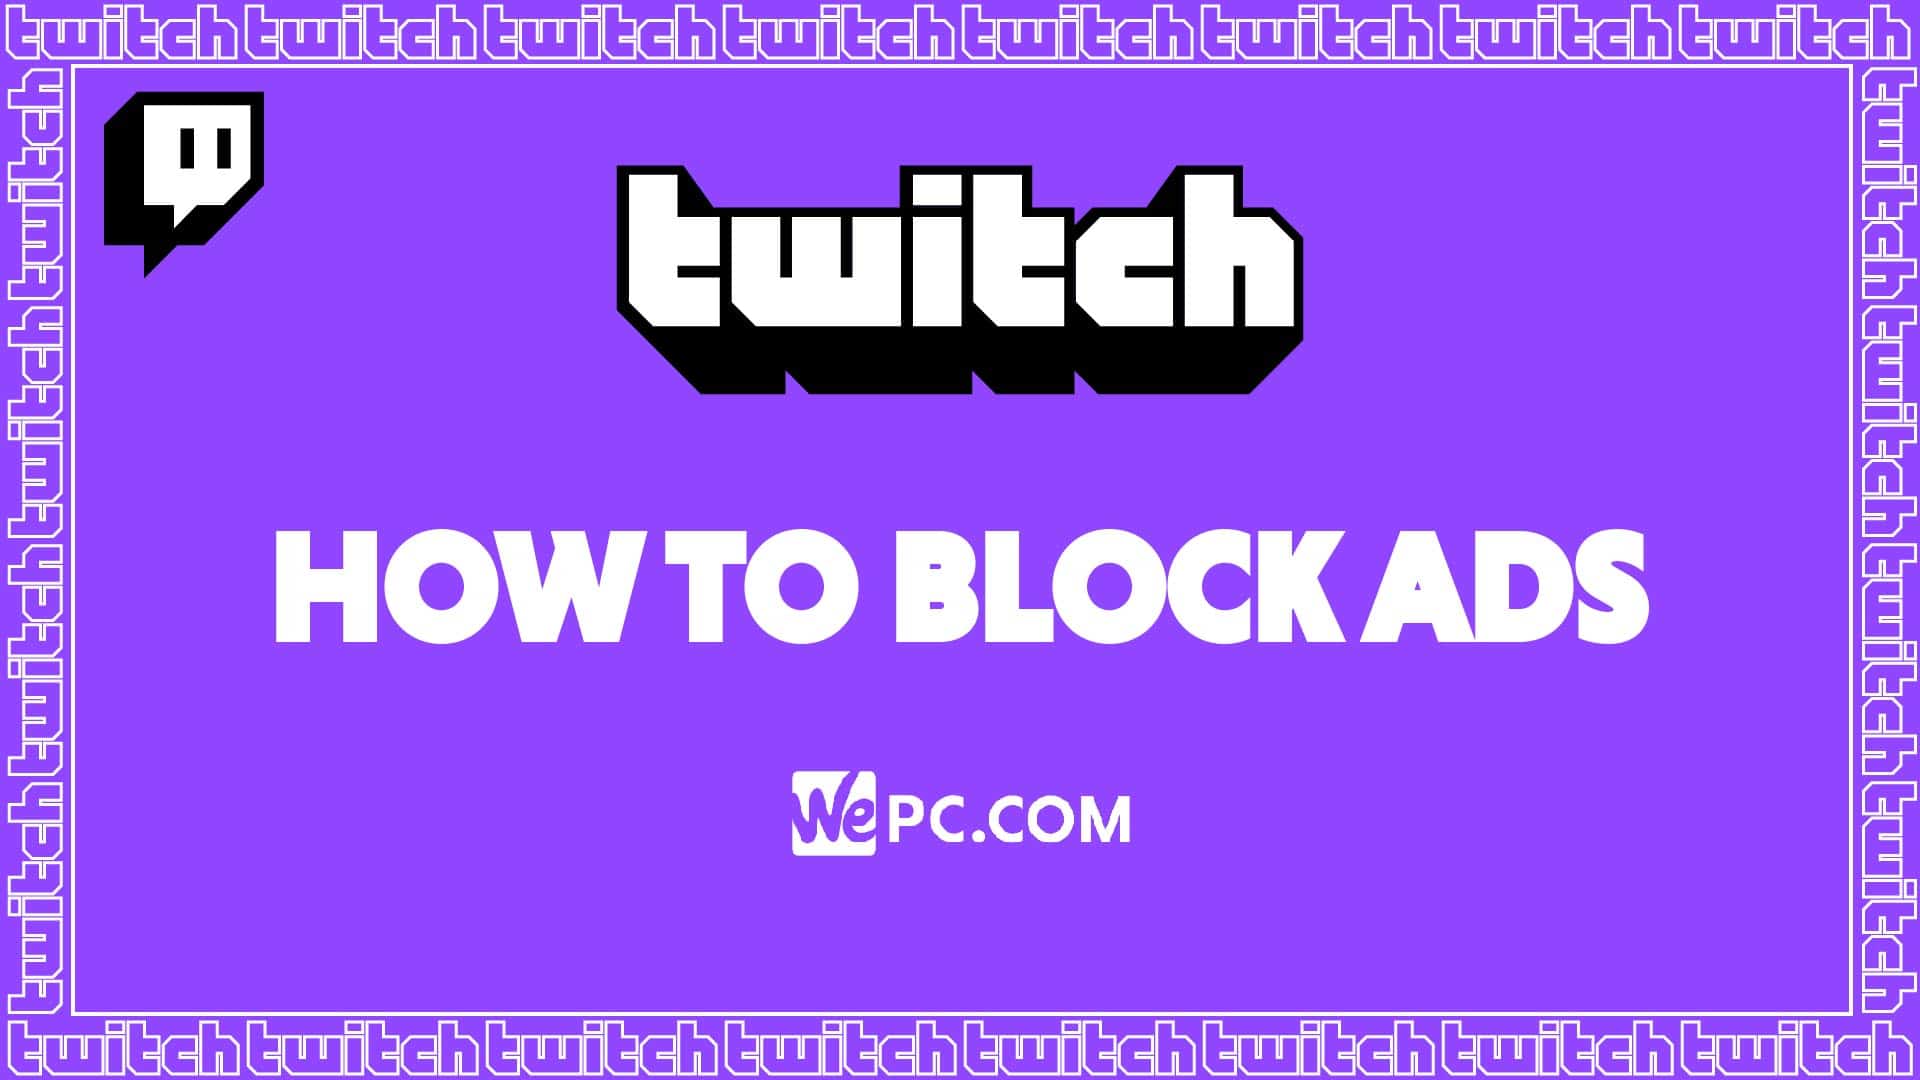 How To Block Ads On Twitch